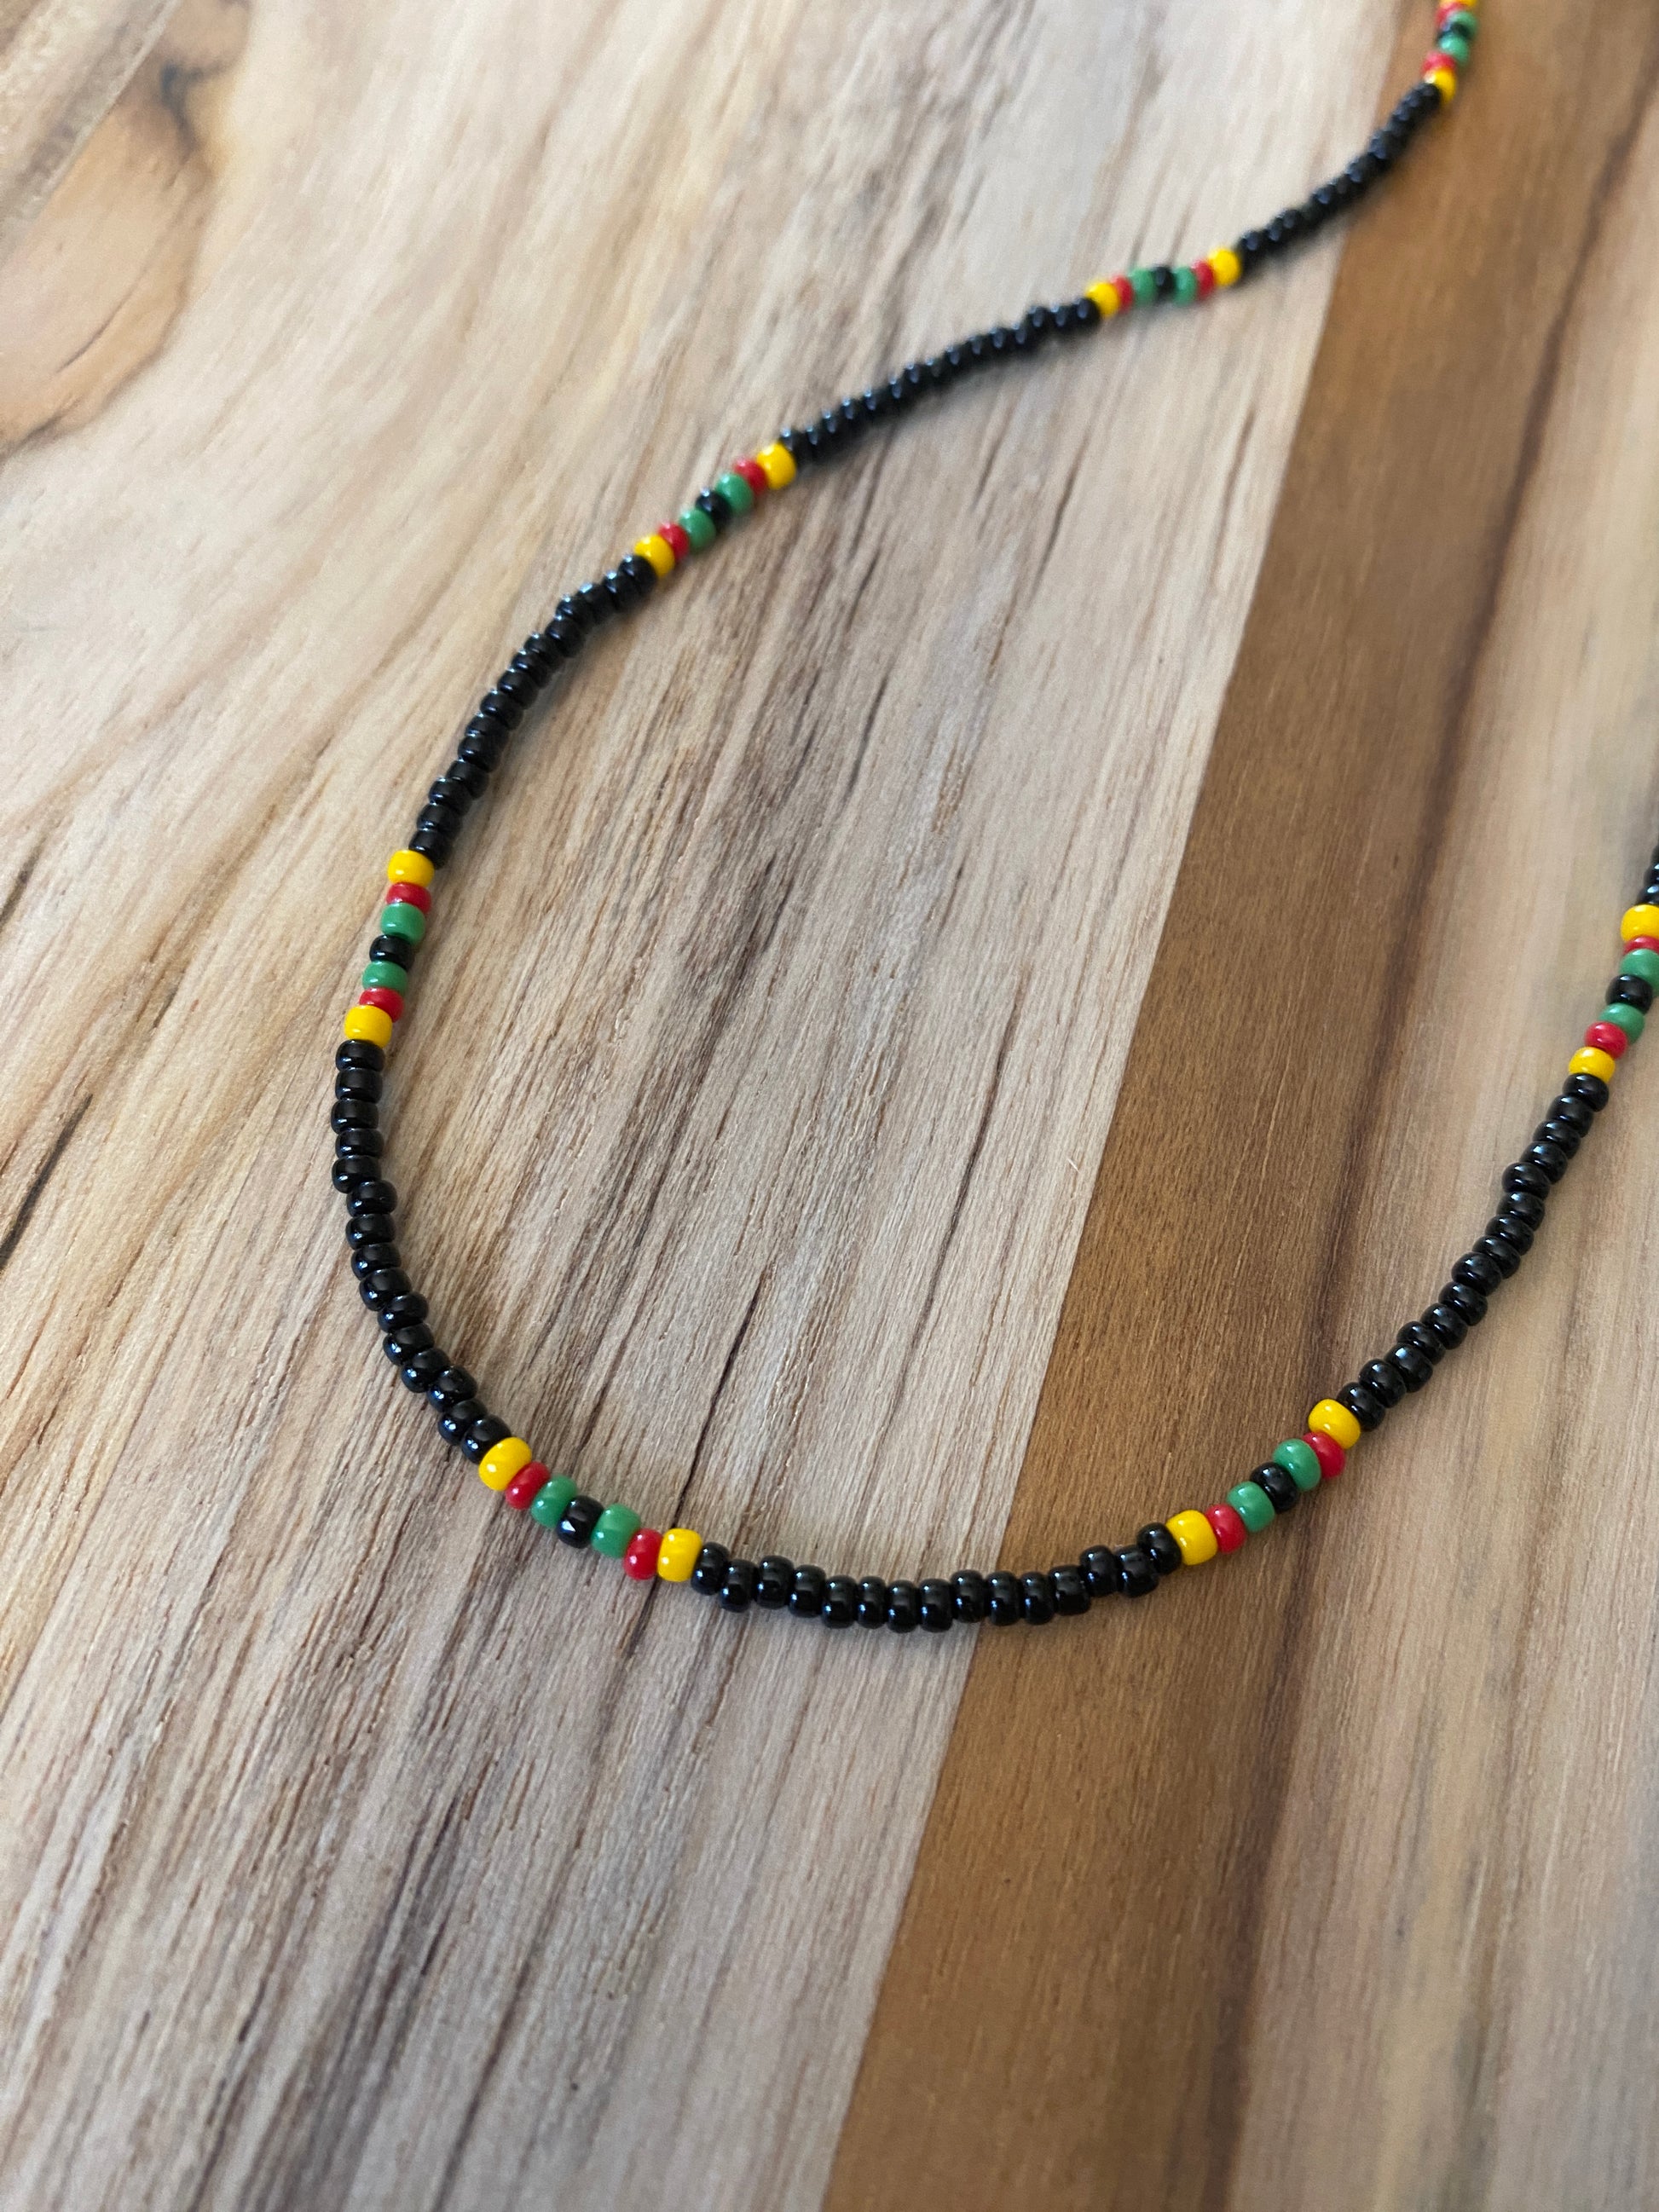 16” Dainty minimalist seed bead necklace Black with yellow red and green - My Urban Gems